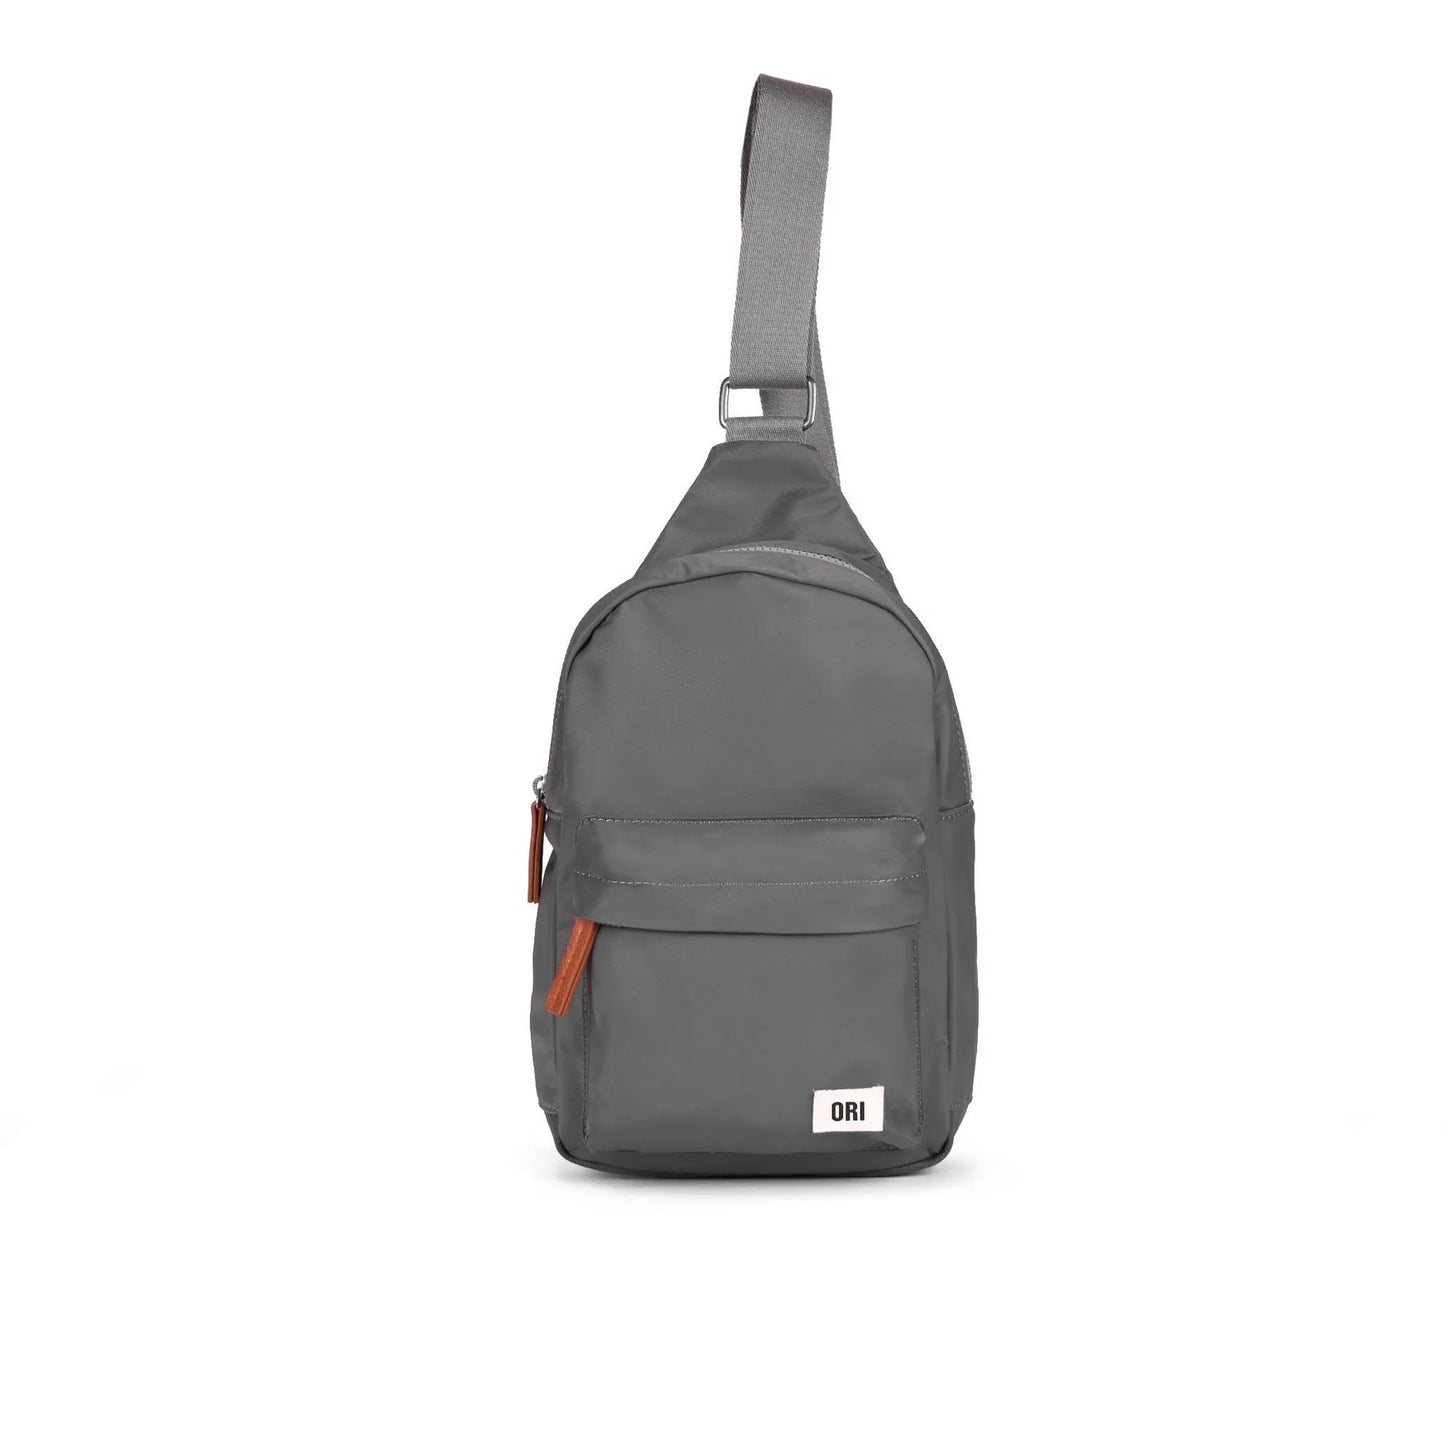 Willesden B Recycled Nylon Backpack - Large